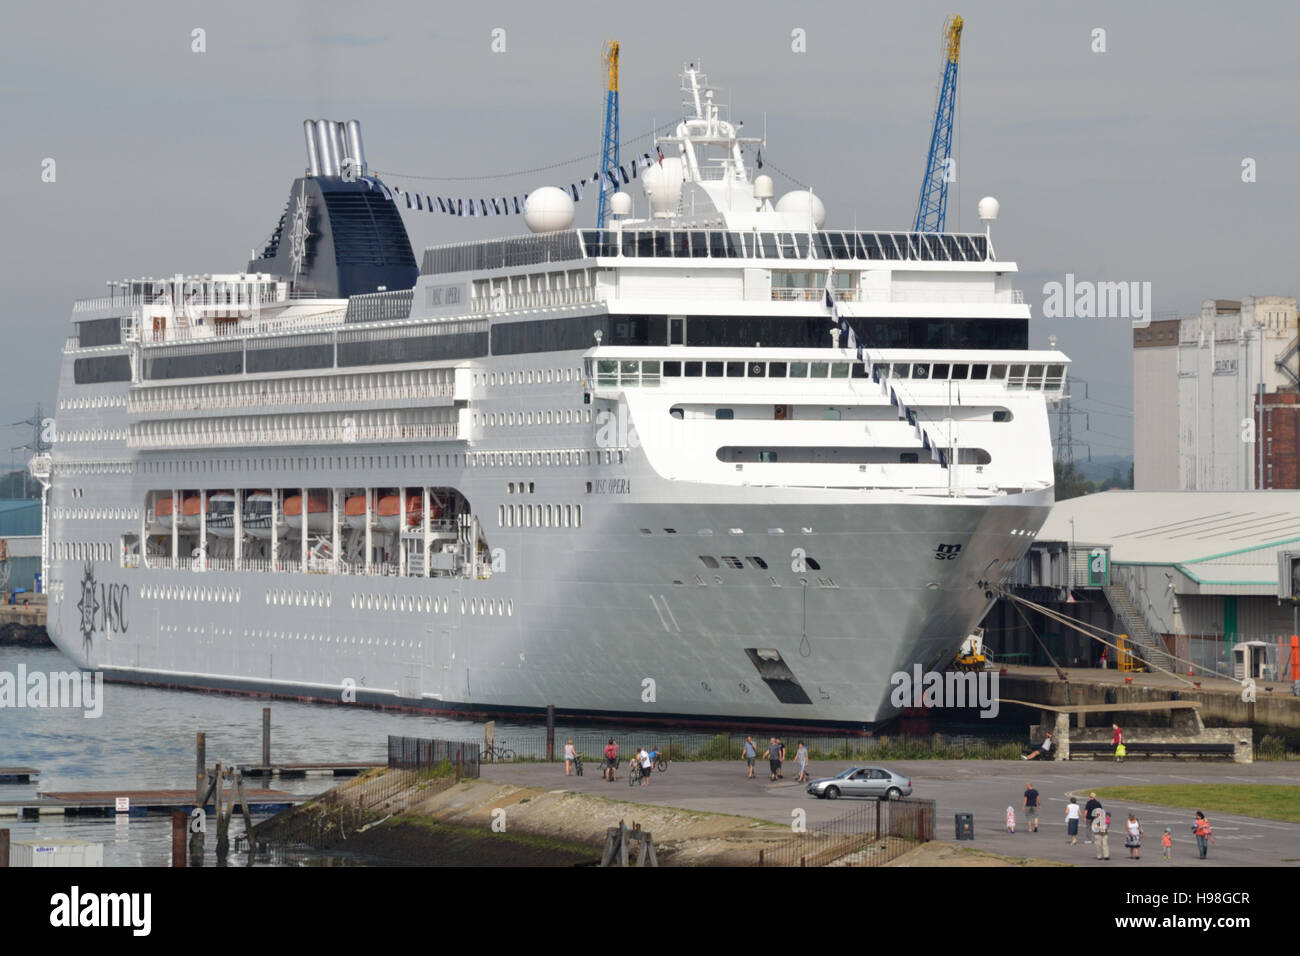 The cruise ship MSC Opera anchored at Southampton docks, the people in the foreground provide a sense of scale. Stock Photo